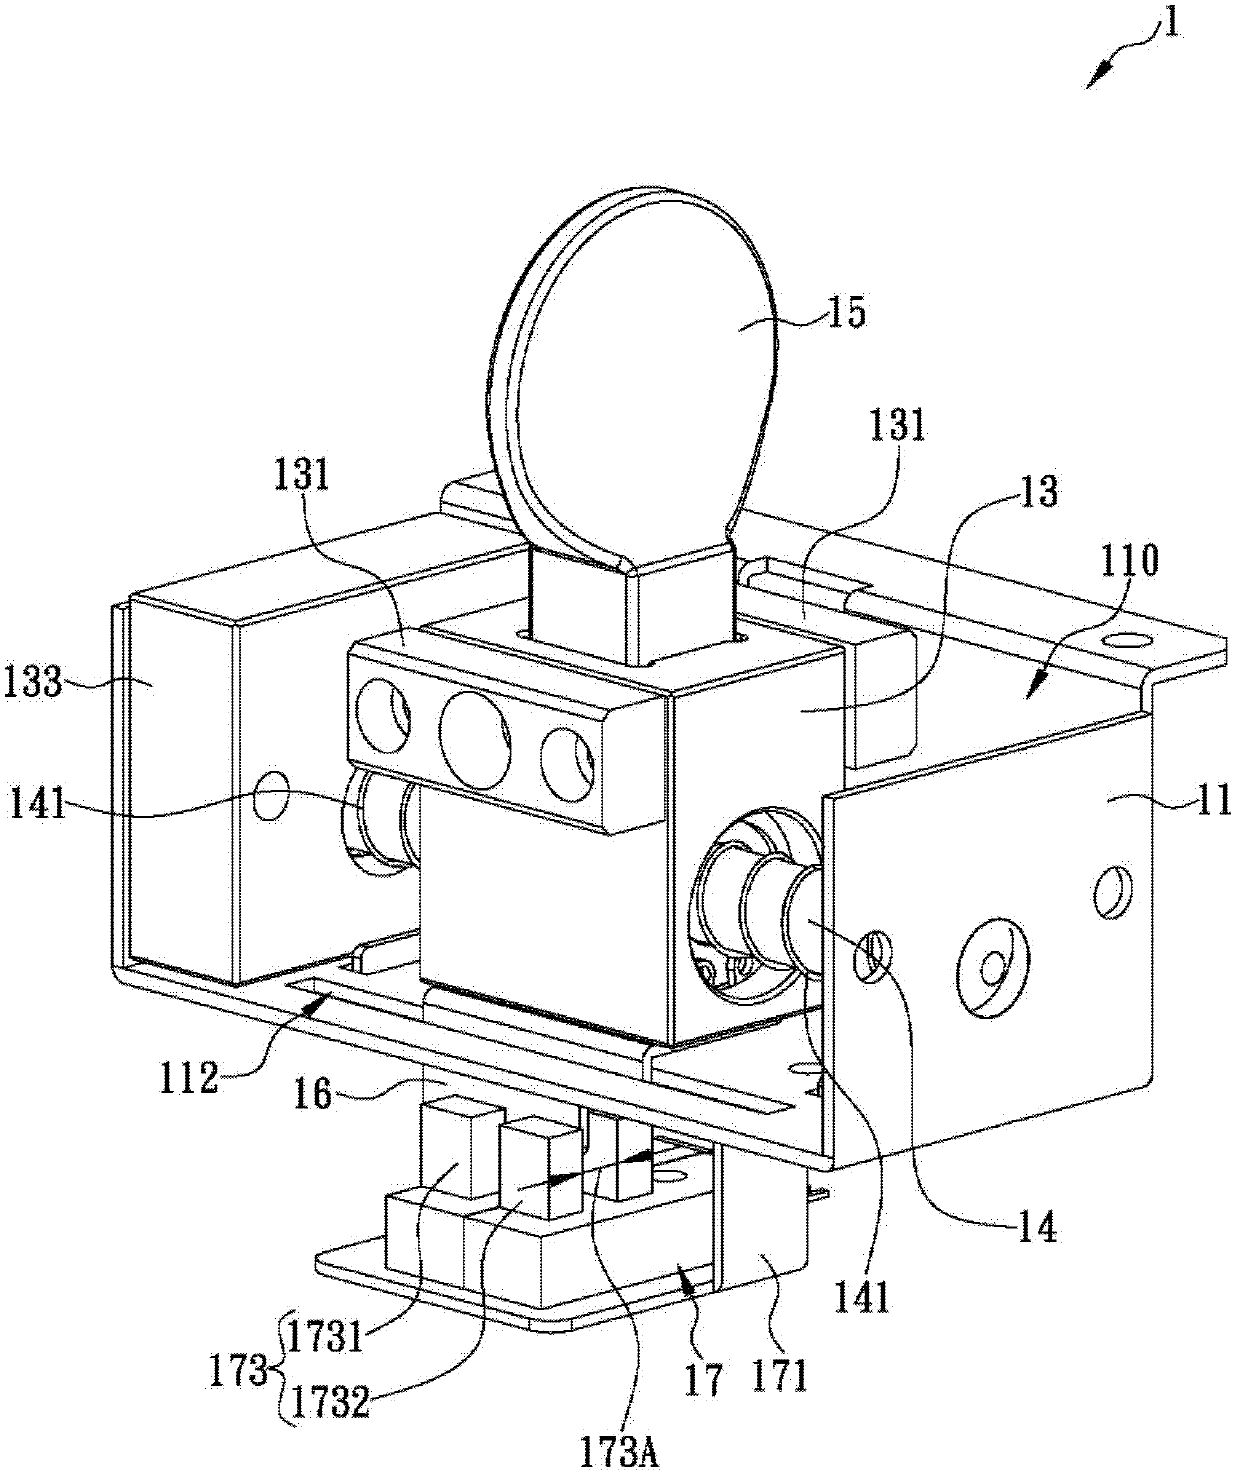 Coin scraping device capable of automatically resetting